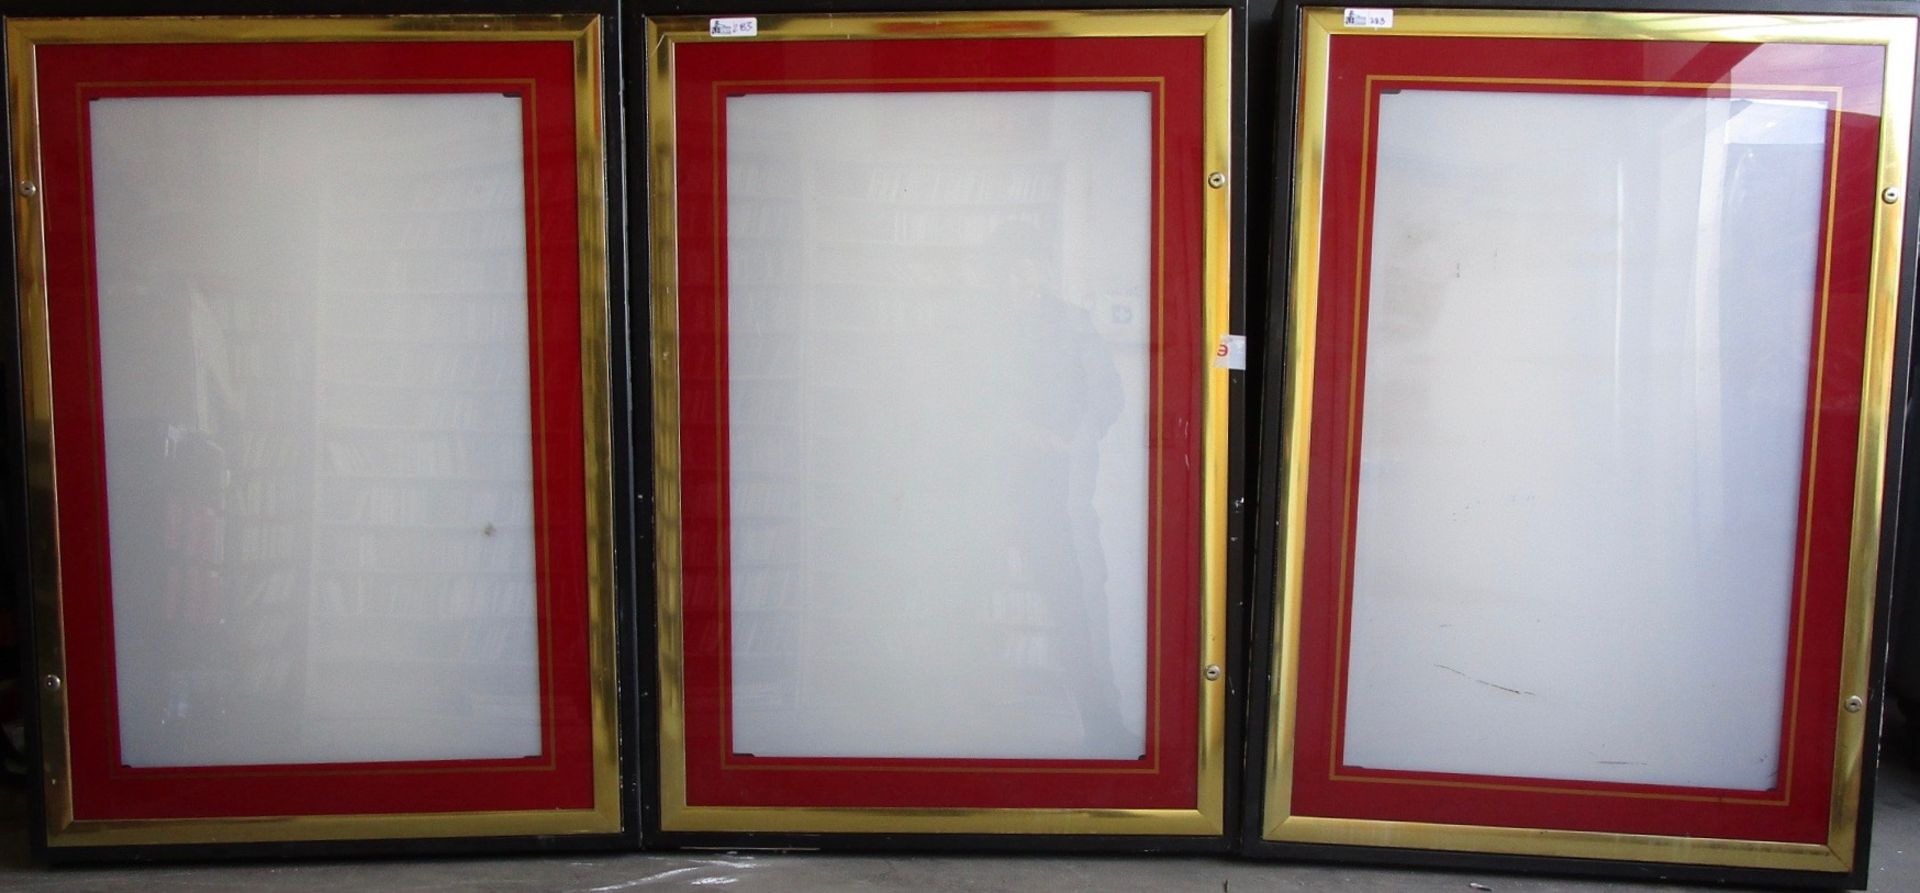 LOT OF 3 VINTAGE THEATER POSTER ENCLOSURE